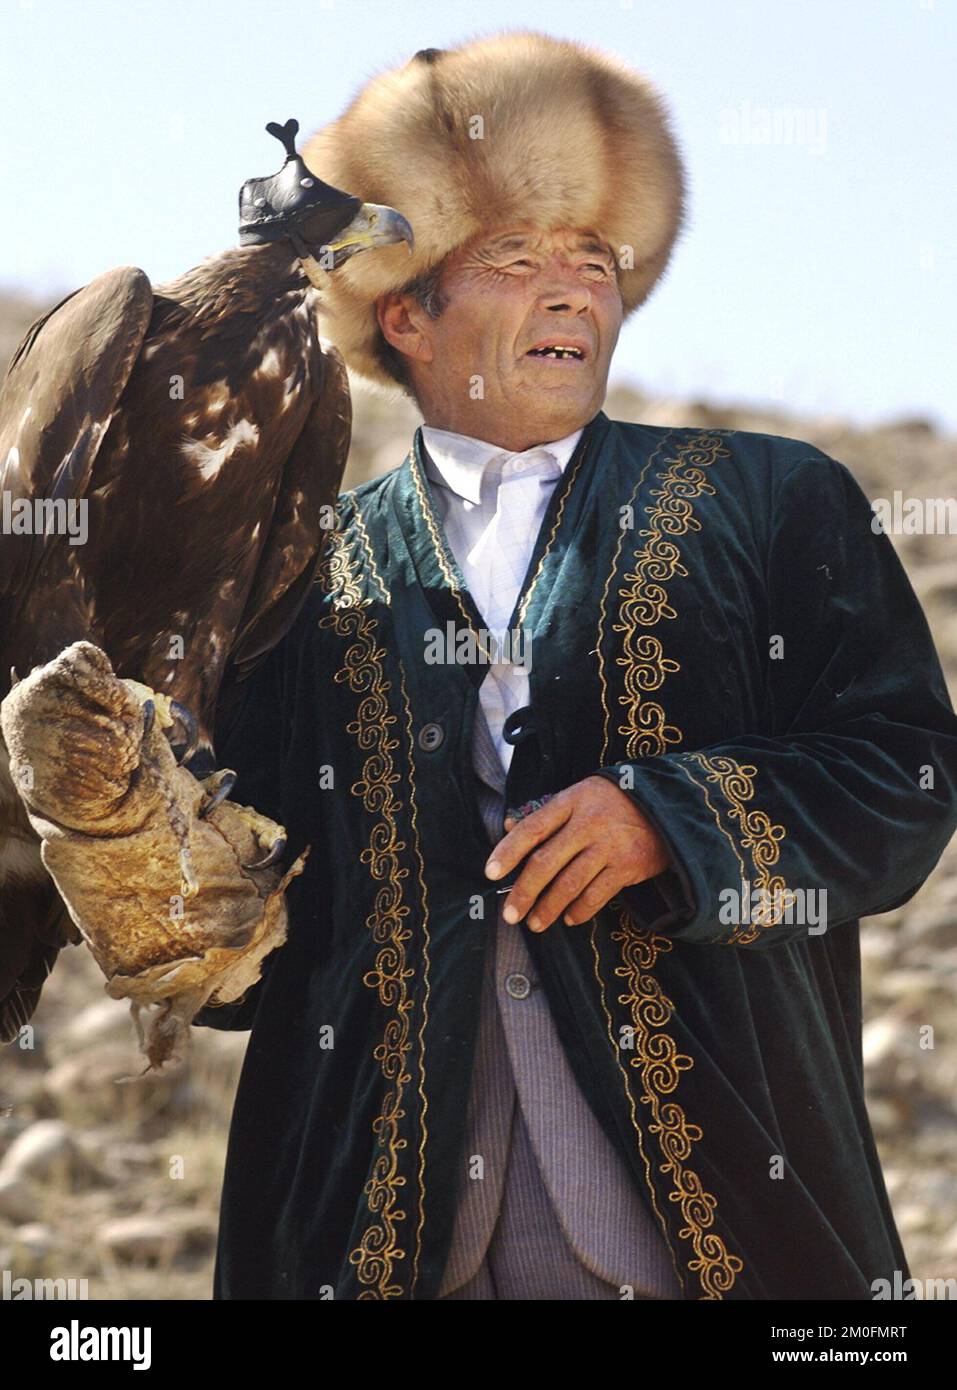 PA PHOTO/POLFOTO - UK USE ONLY : Kazakstan 2002. The last eagle hunters in the world. In Kazakstan a man is a man when he can ride a horse and hunt with an eagle. They have done it the same way for the last 4000 years. Stock Photo